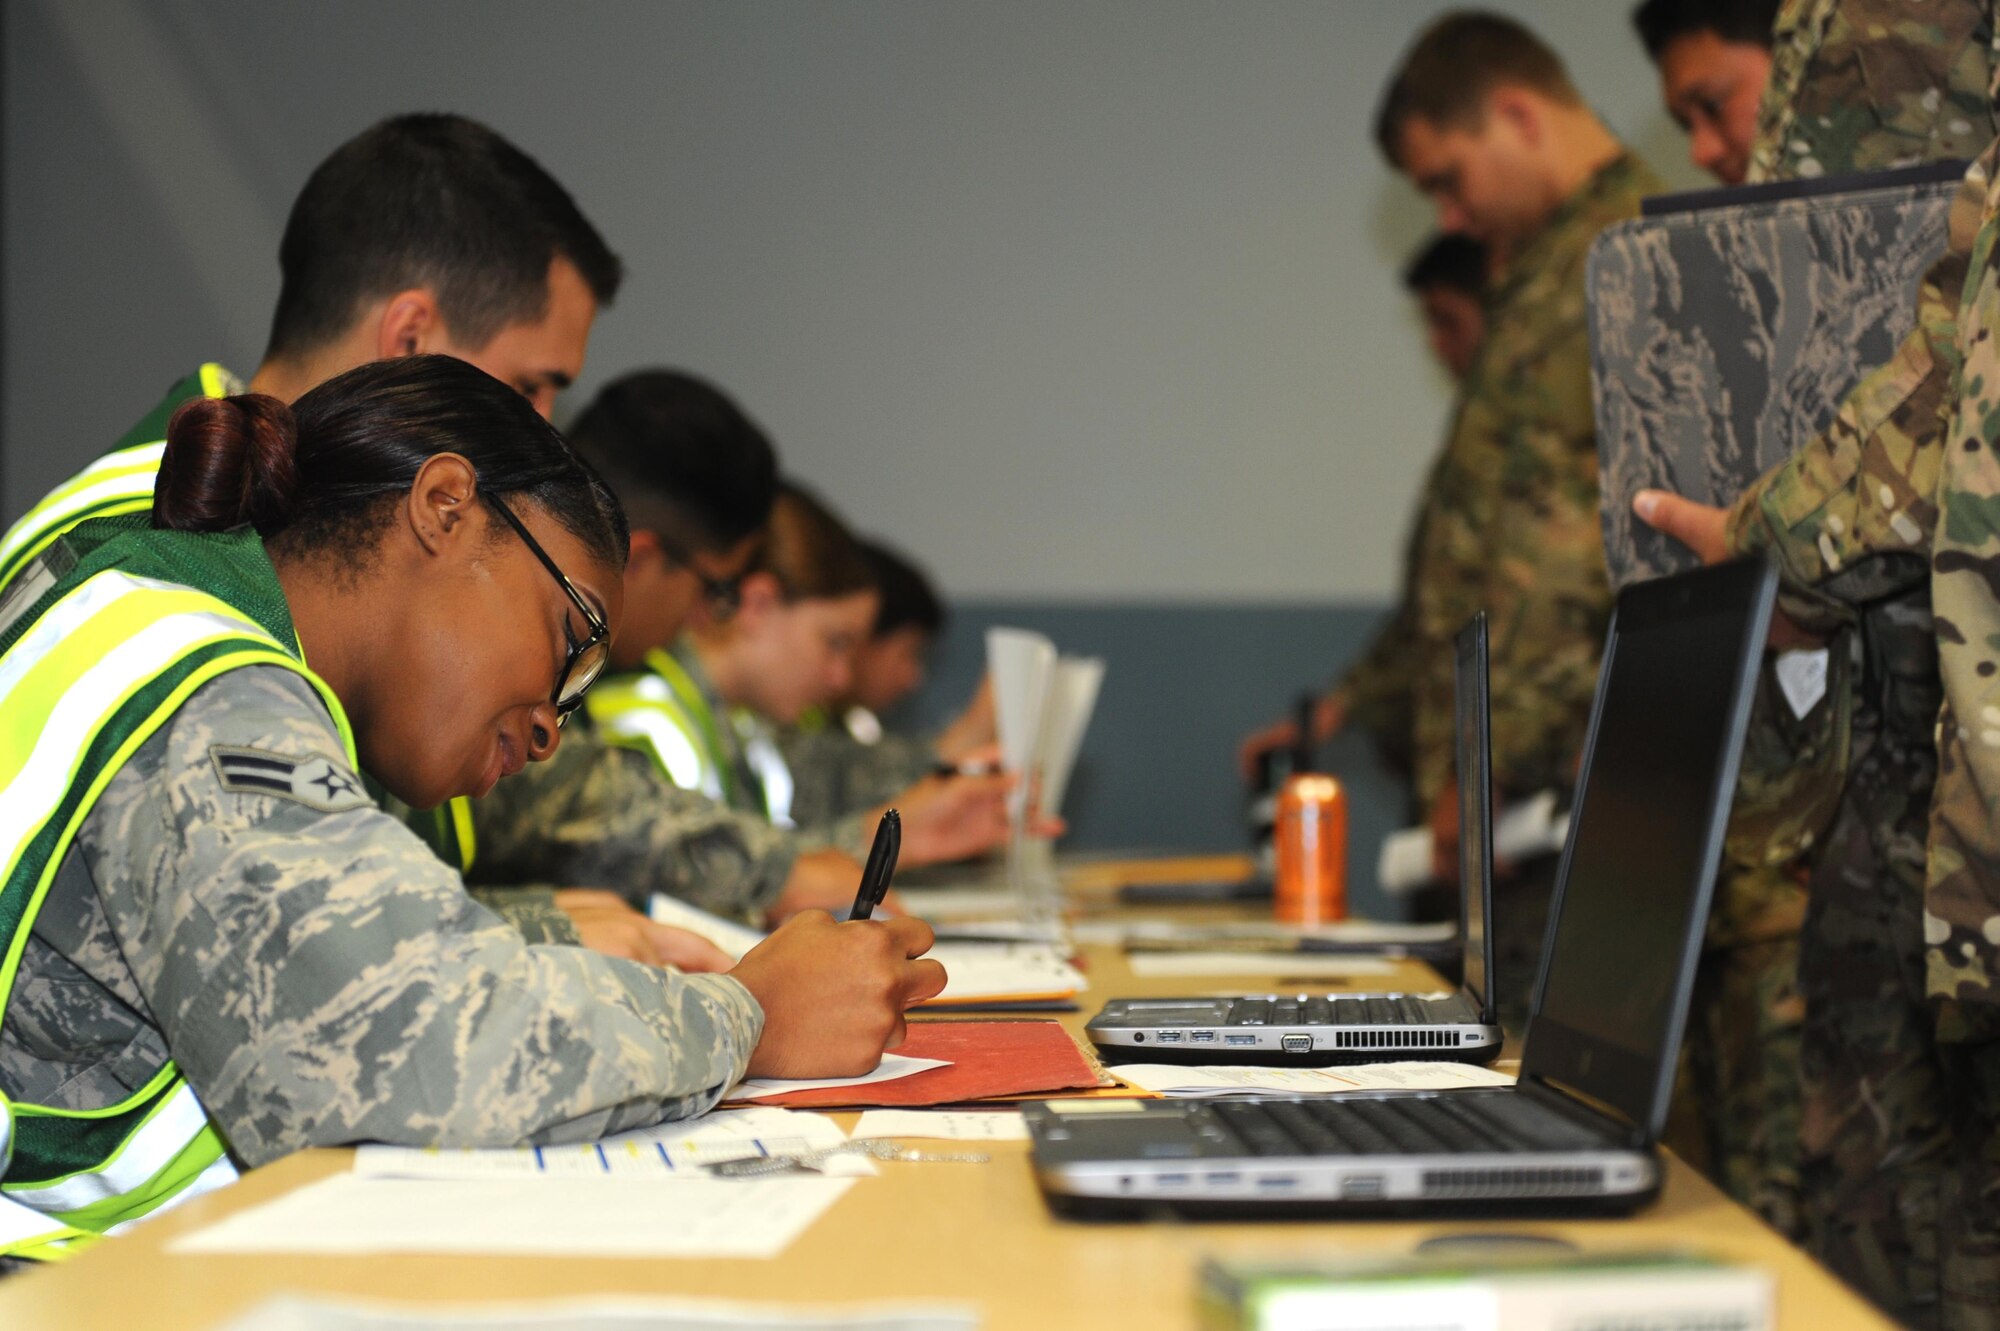 U.S. Air Force Airman First Class Mariah Manning, 19th Force Support Squadron customer support specialist, looks over paperwork for service members Sept. 1, 2016, at a personnel deployment function line on Little Rock Air Force Base, Ark. Airmen from the 19th FSS ensured Airmen were ready to deploy, maintaining mission readiness. U.S Air Force photo by Airman Grace Nichols) 